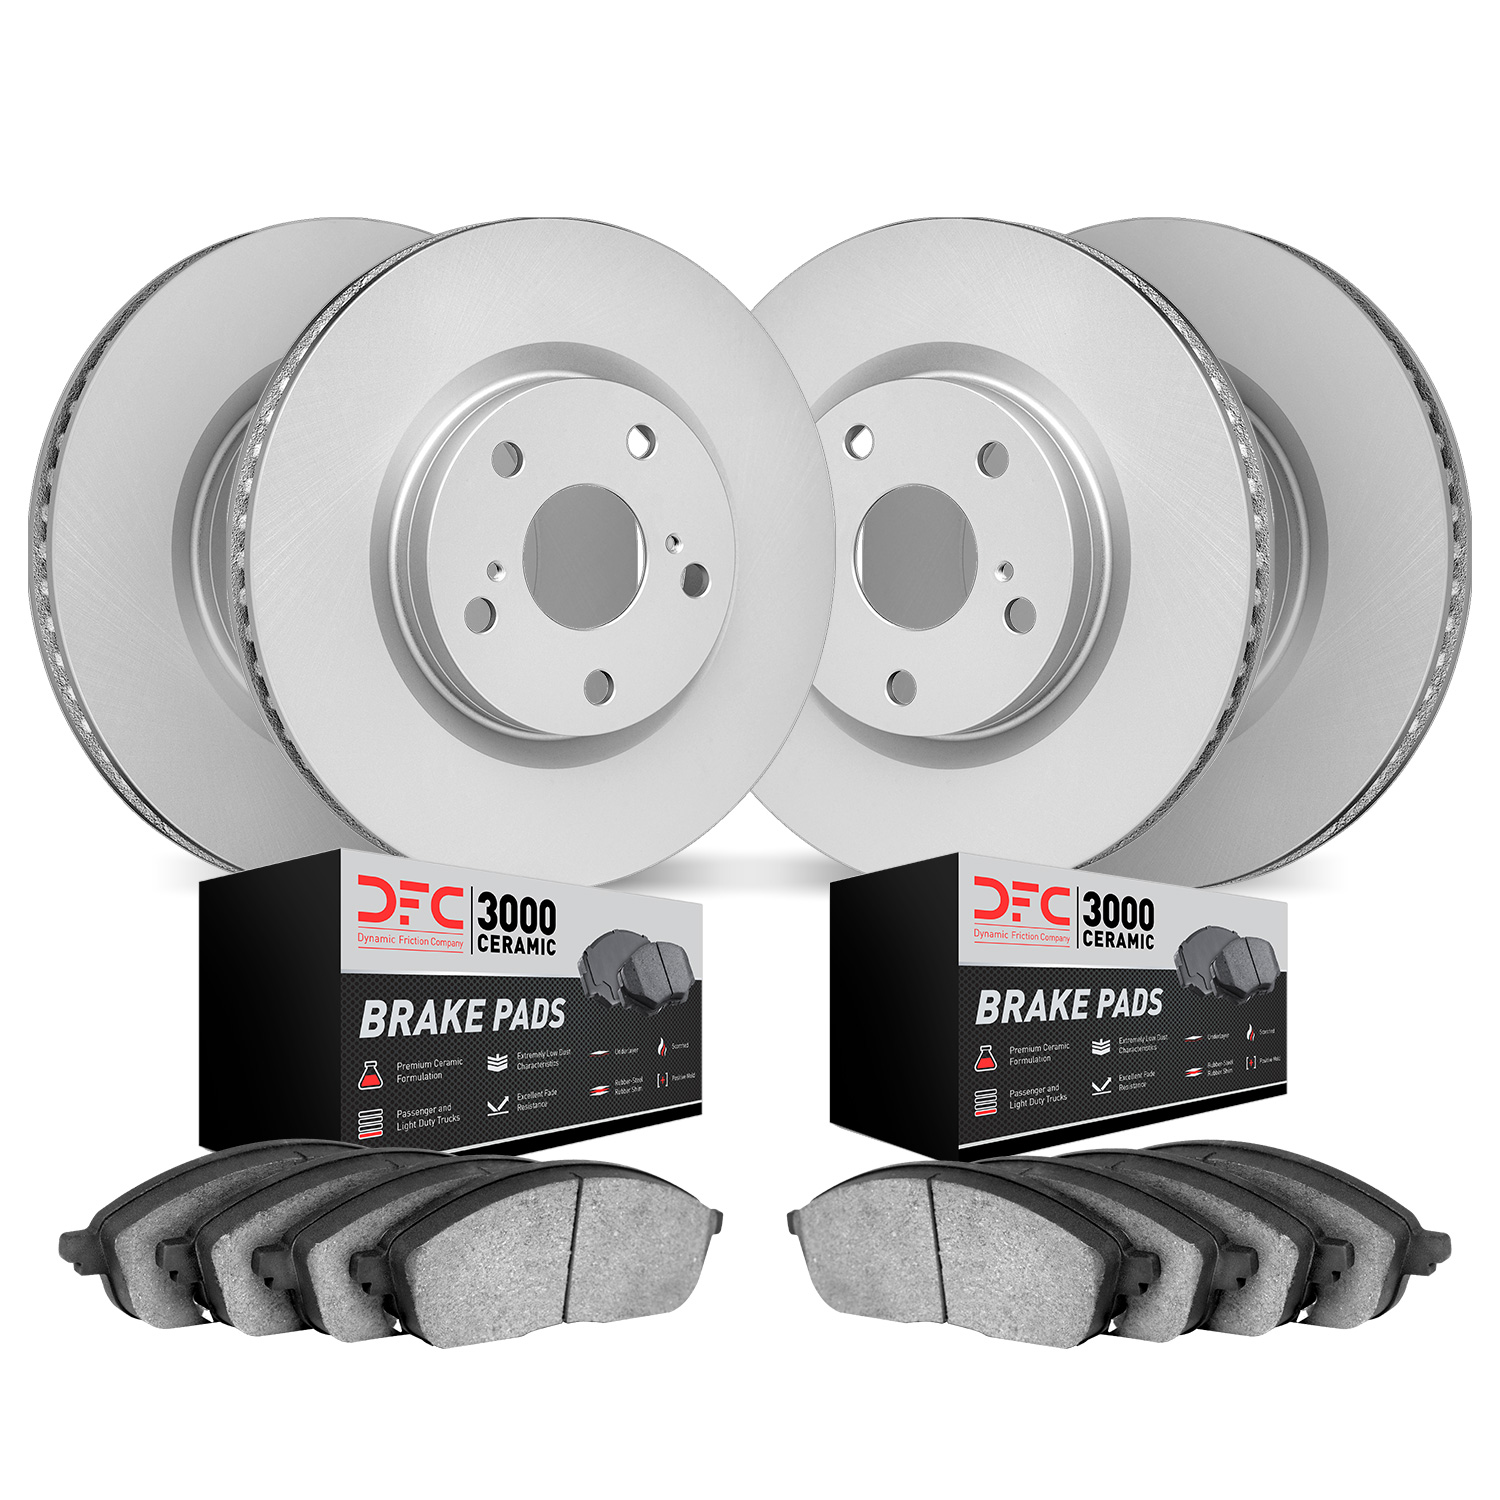 4304-75011 Geospec Brake Rotors with 3000-Series Ceramic Brake Pads Kit, 2014-2015 Lexus/Toyota/Scion, Position: Front and Rear